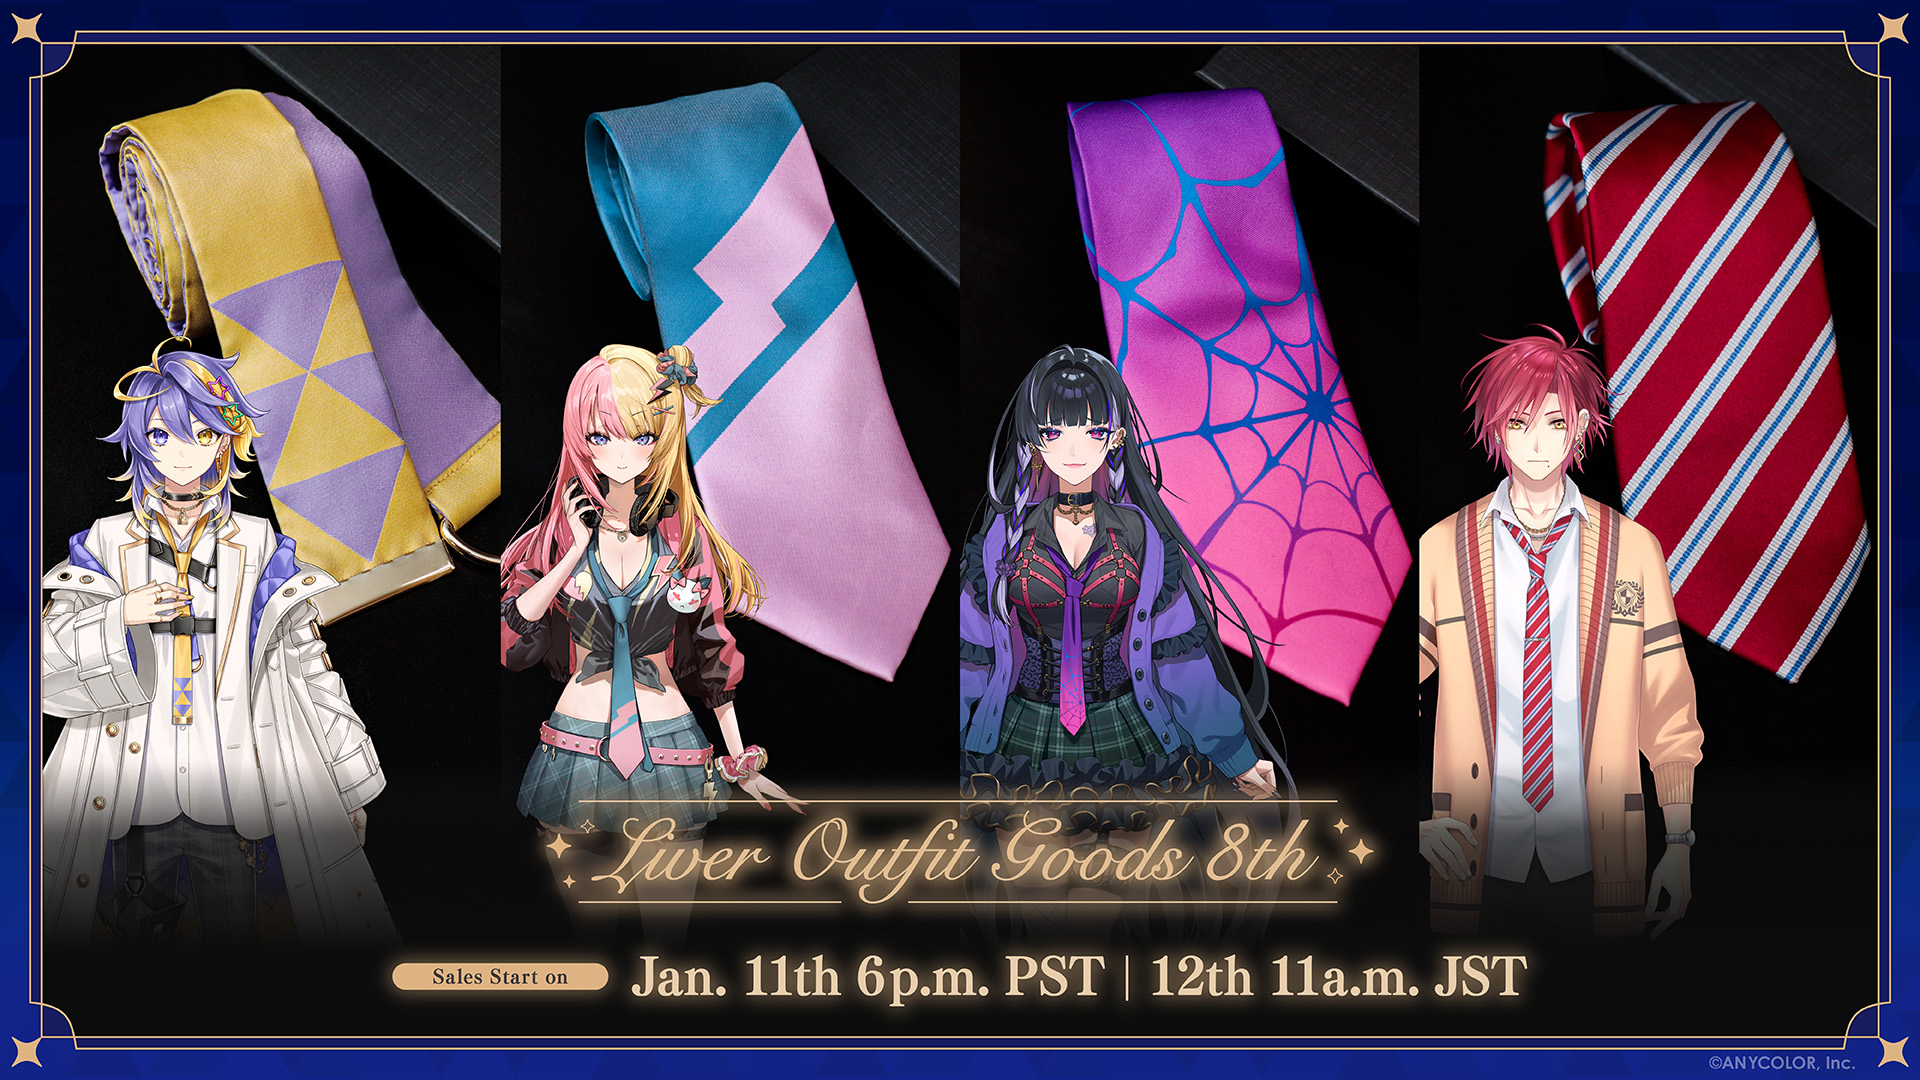 NIJISANJI EN announces “Liver Outfit Goods 8th” | ANYCOLOR株式 